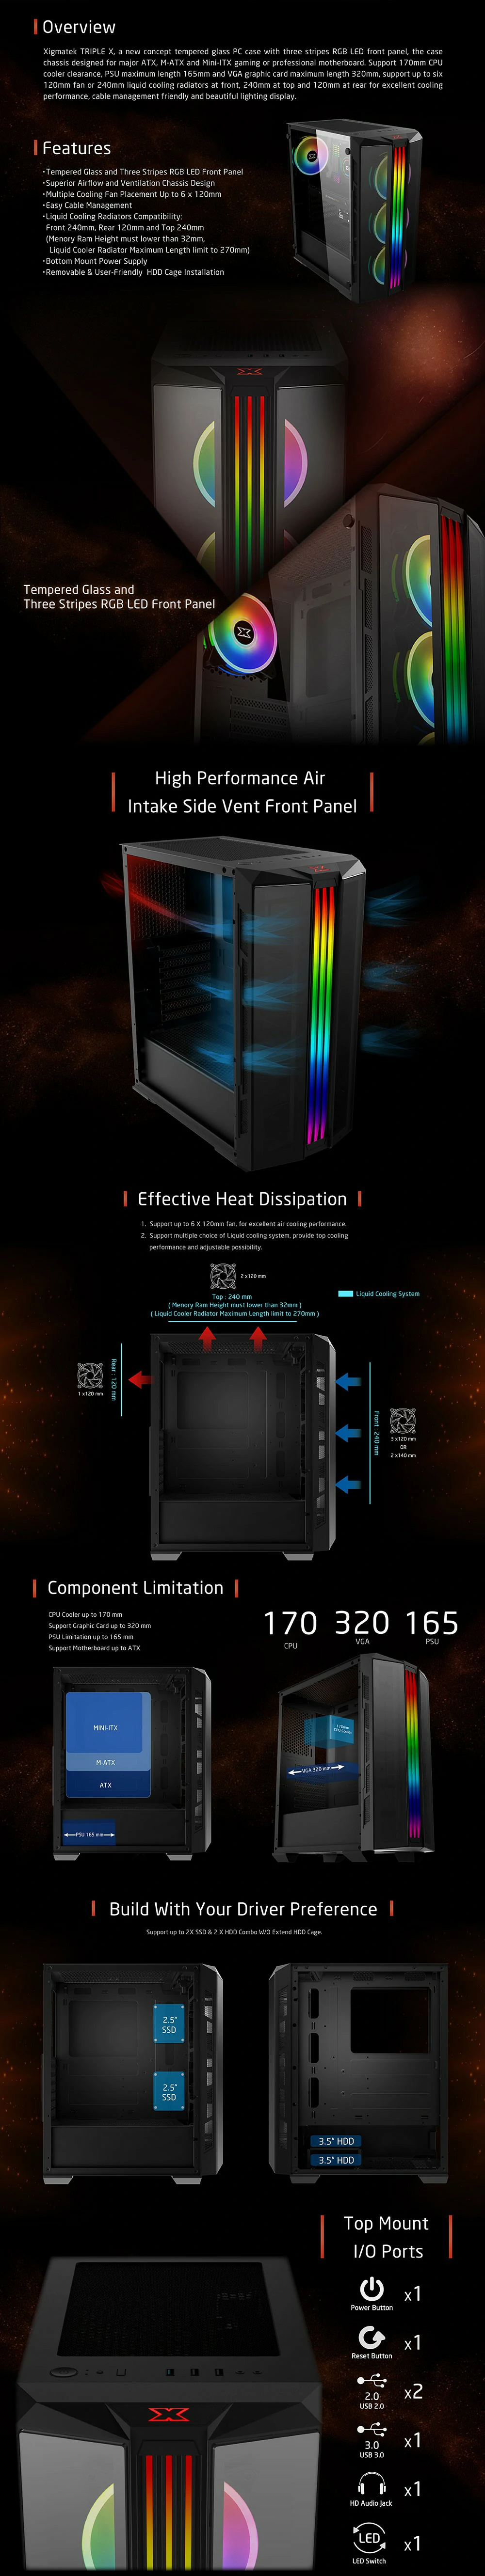 Overview - Specifications - Xigmatek - Triple X - Tempered Glass ARGB Mid Tower Chassis